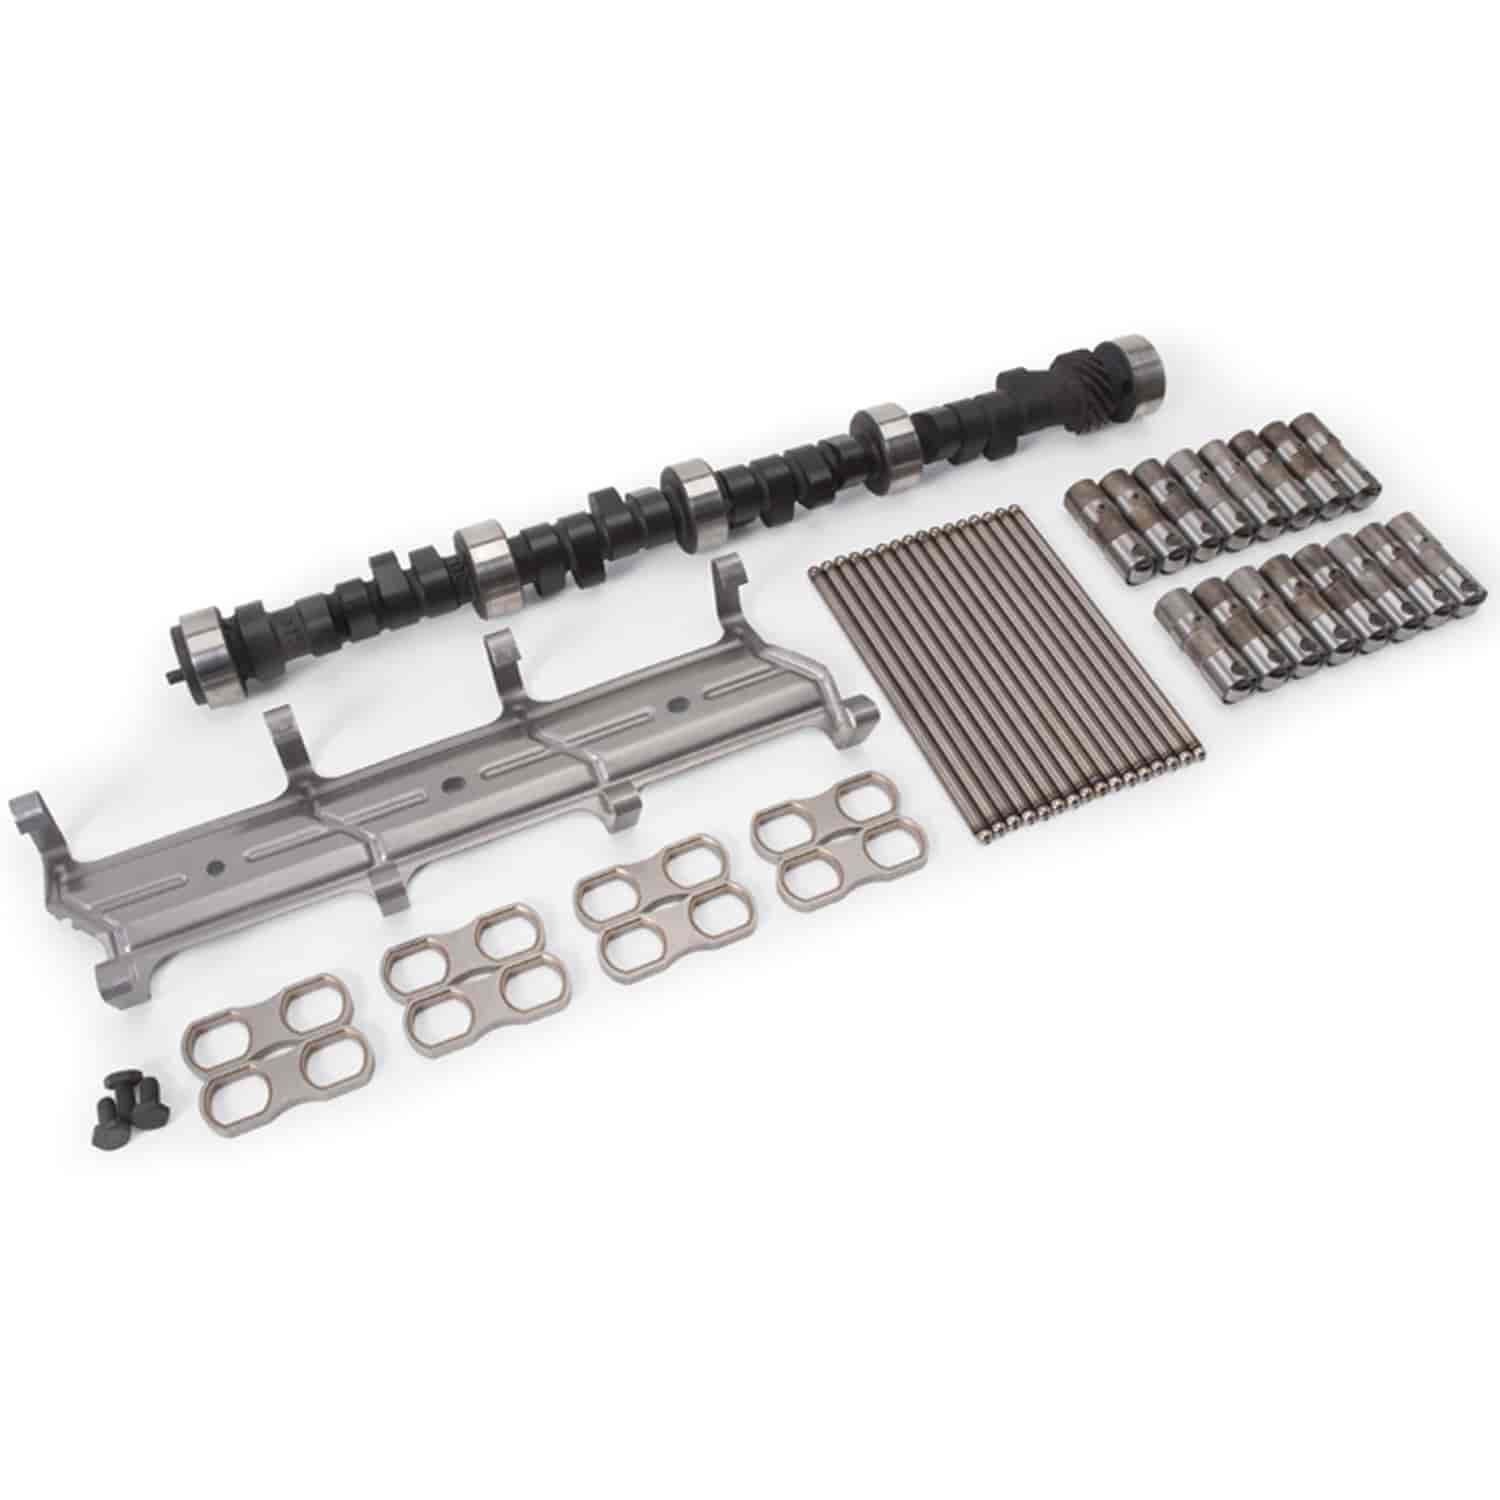 Rollin' Thunder Hydraulic Roller Camshaft Kit for 1987-Later Small Block Chevy 283-400